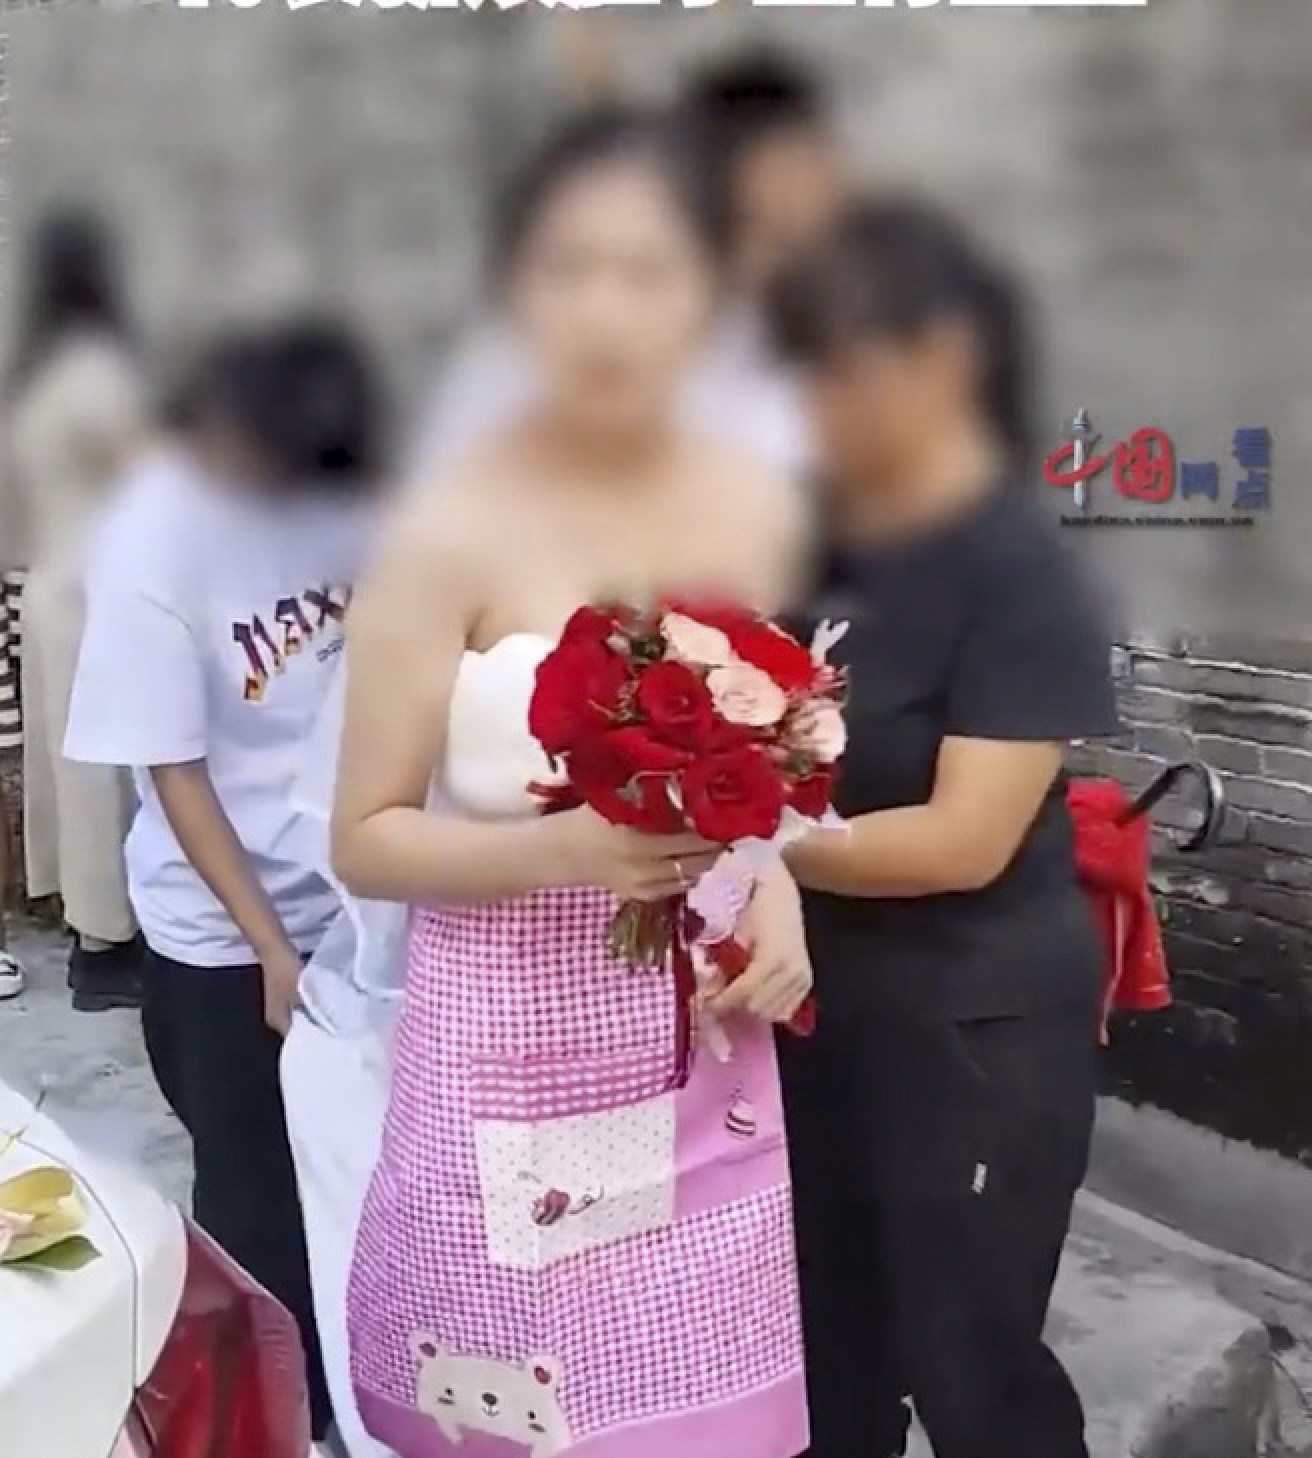 Two older women at the wedding are seen putting the apron on the bride at the ceremony. Photo: Weibo